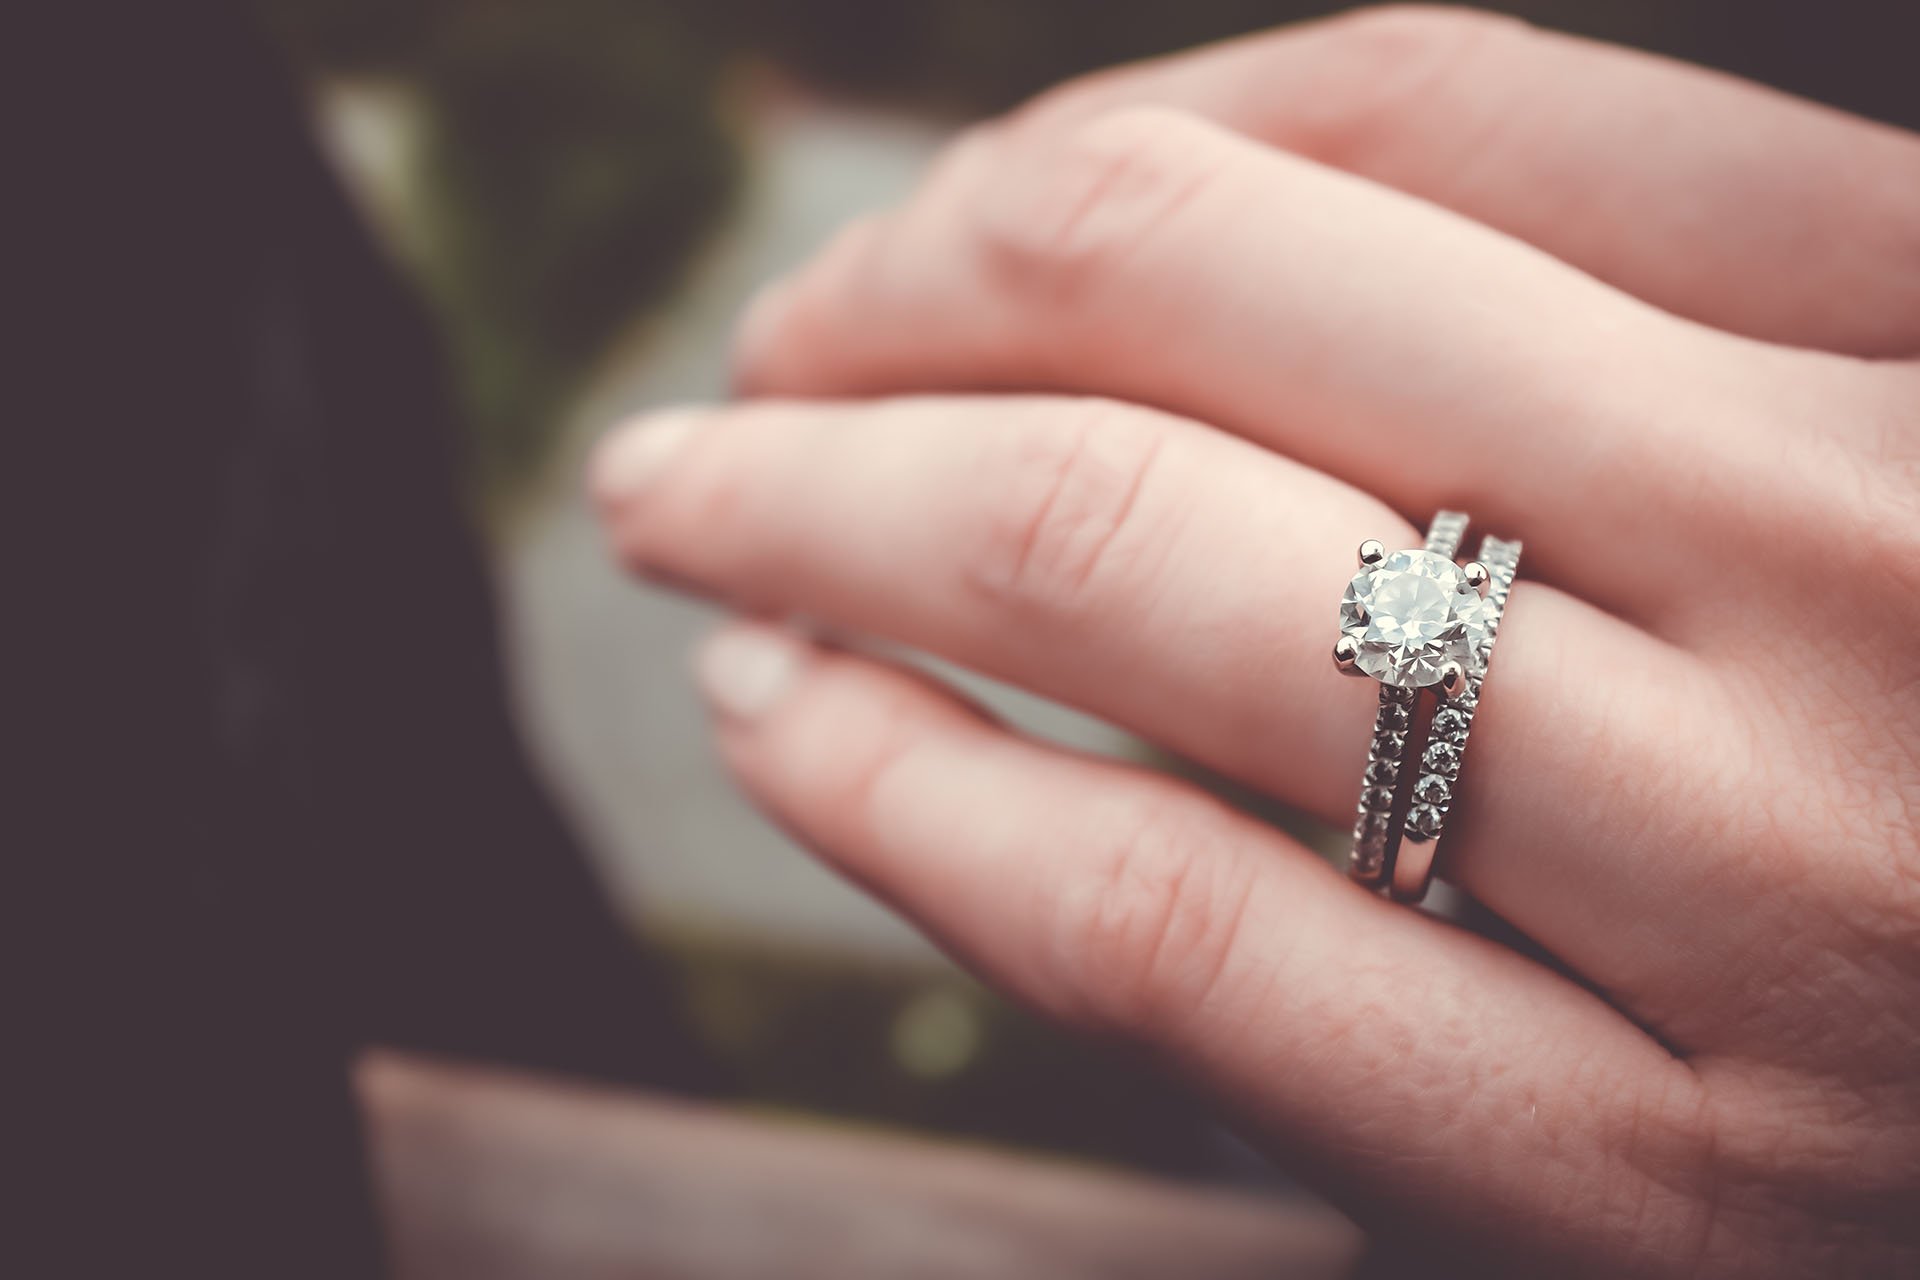 Where to wear wedding and engagement rings